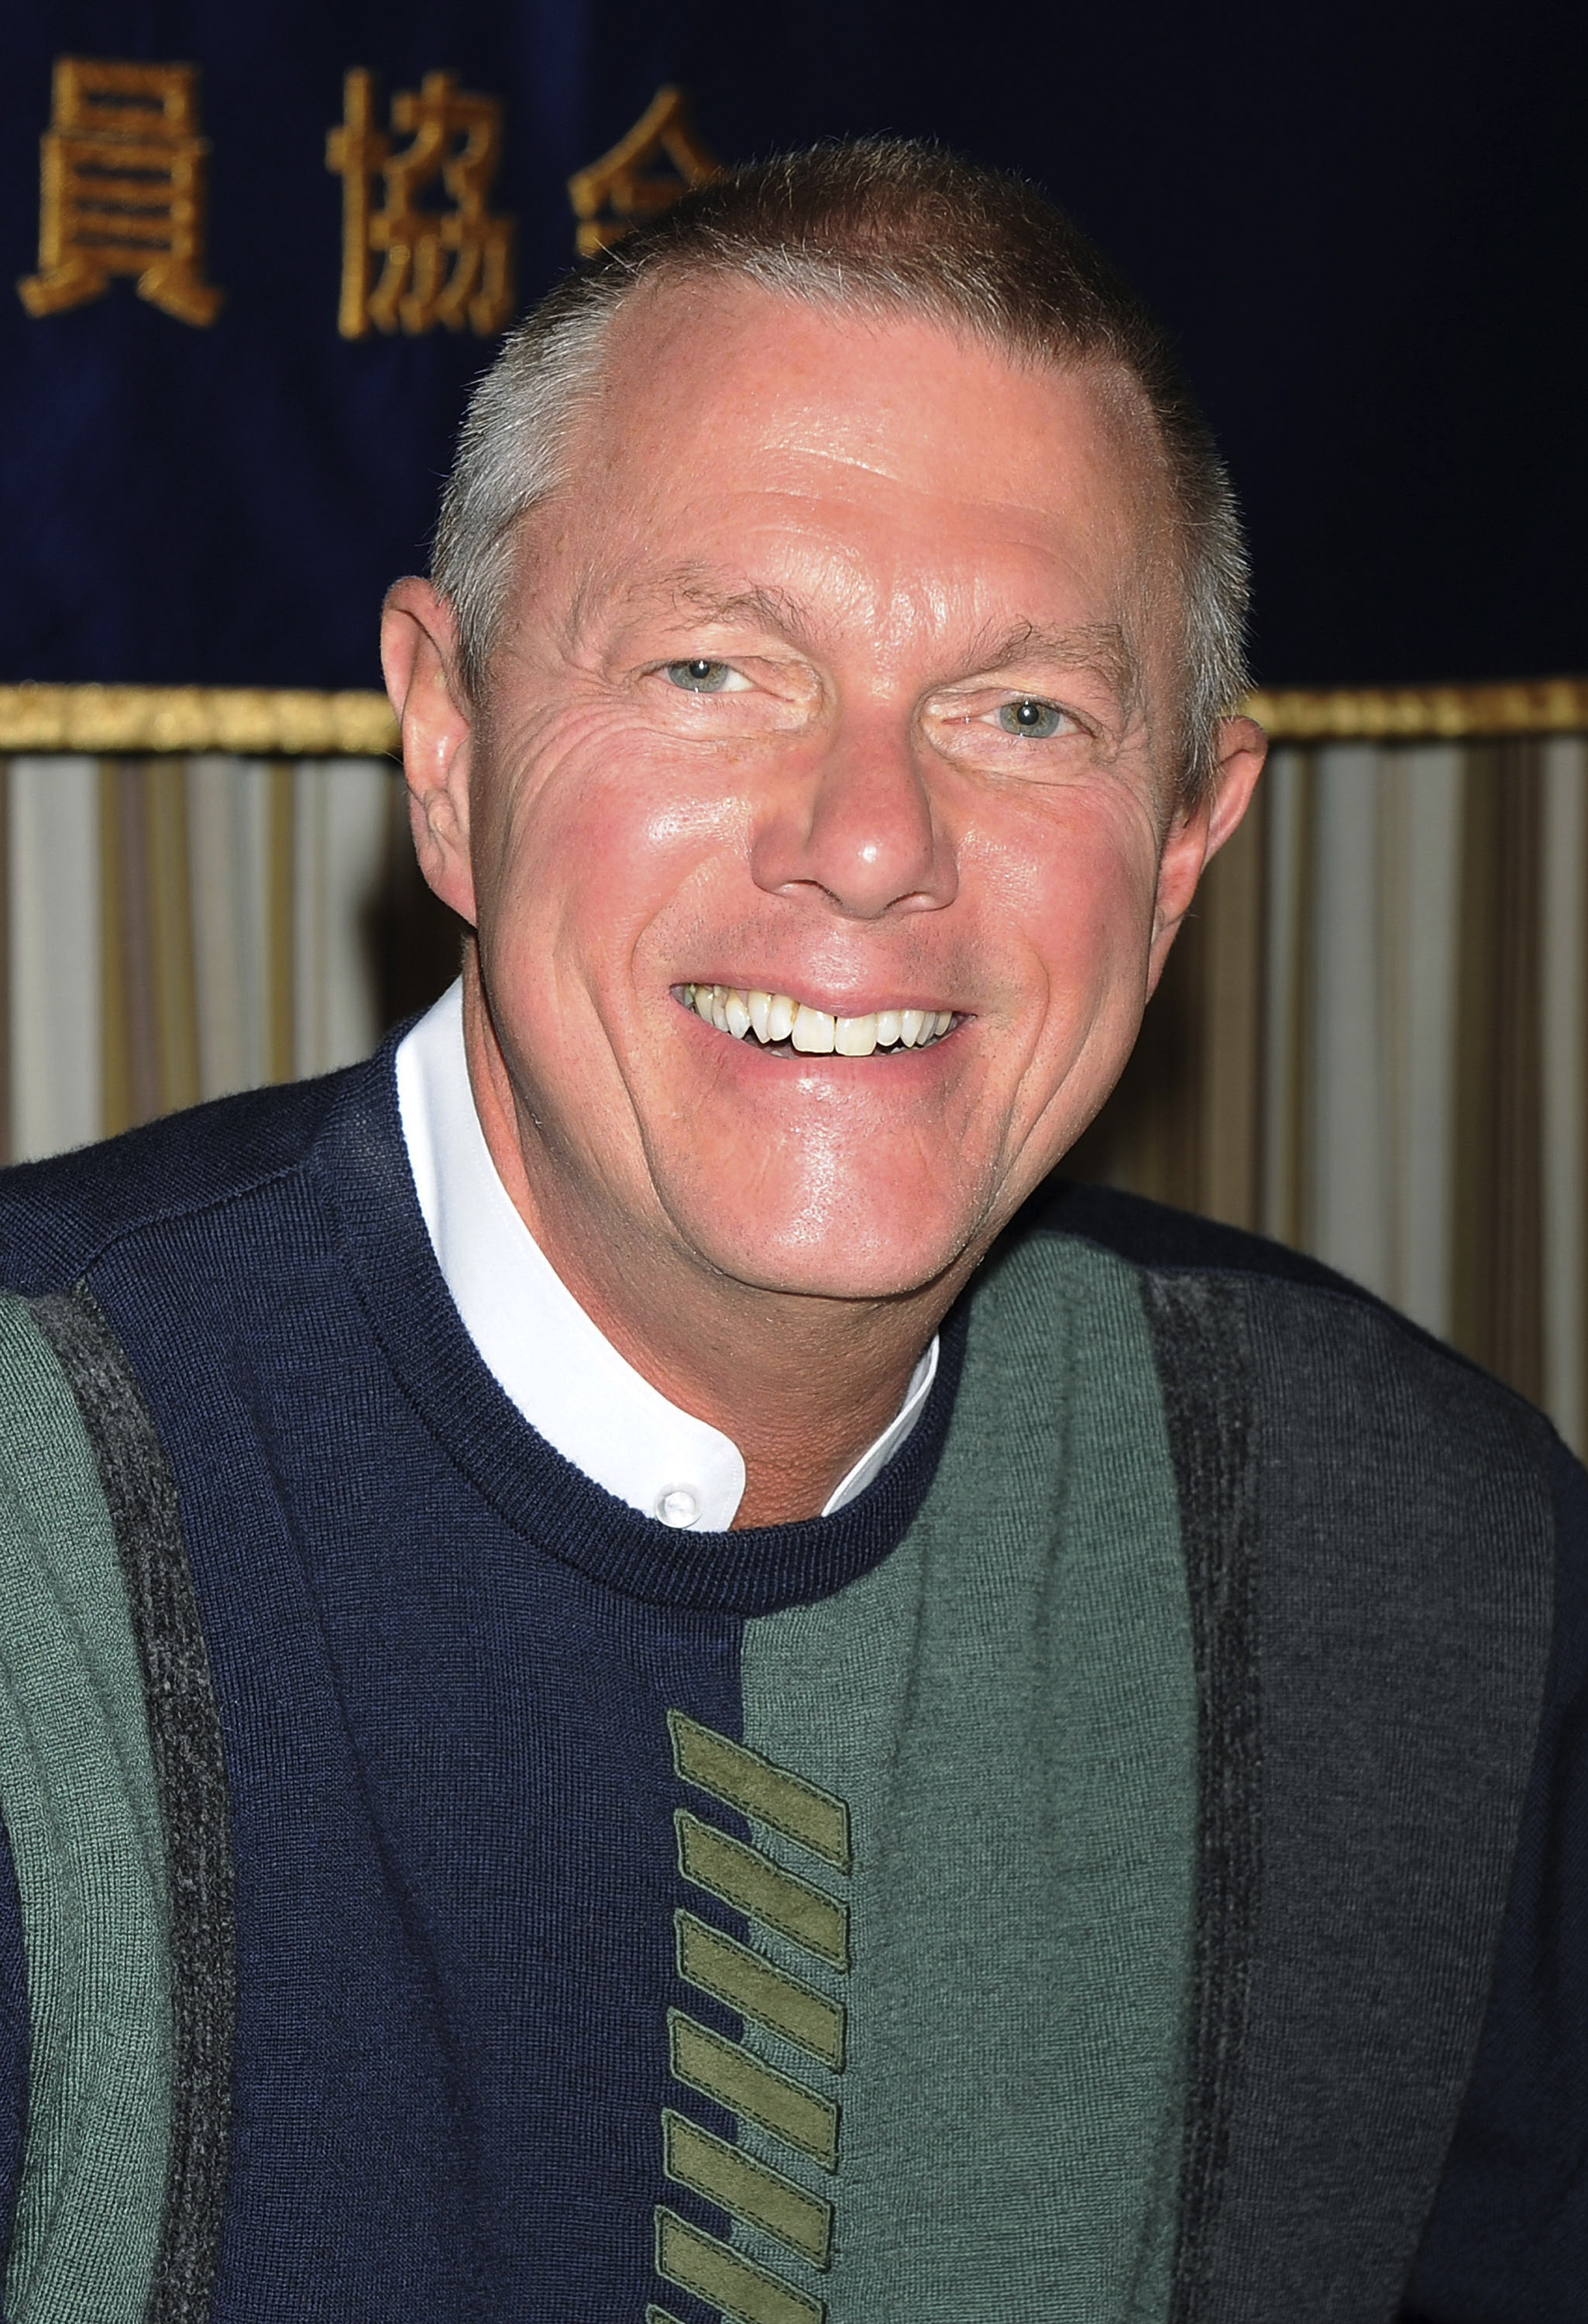 Richard Carpenter of The Carpenters attends the press conference on his music career relaunch at Foreign Correspondents' Club In Japan on October 15, 2008 in Tokyo, Japan | Source: Getty Images